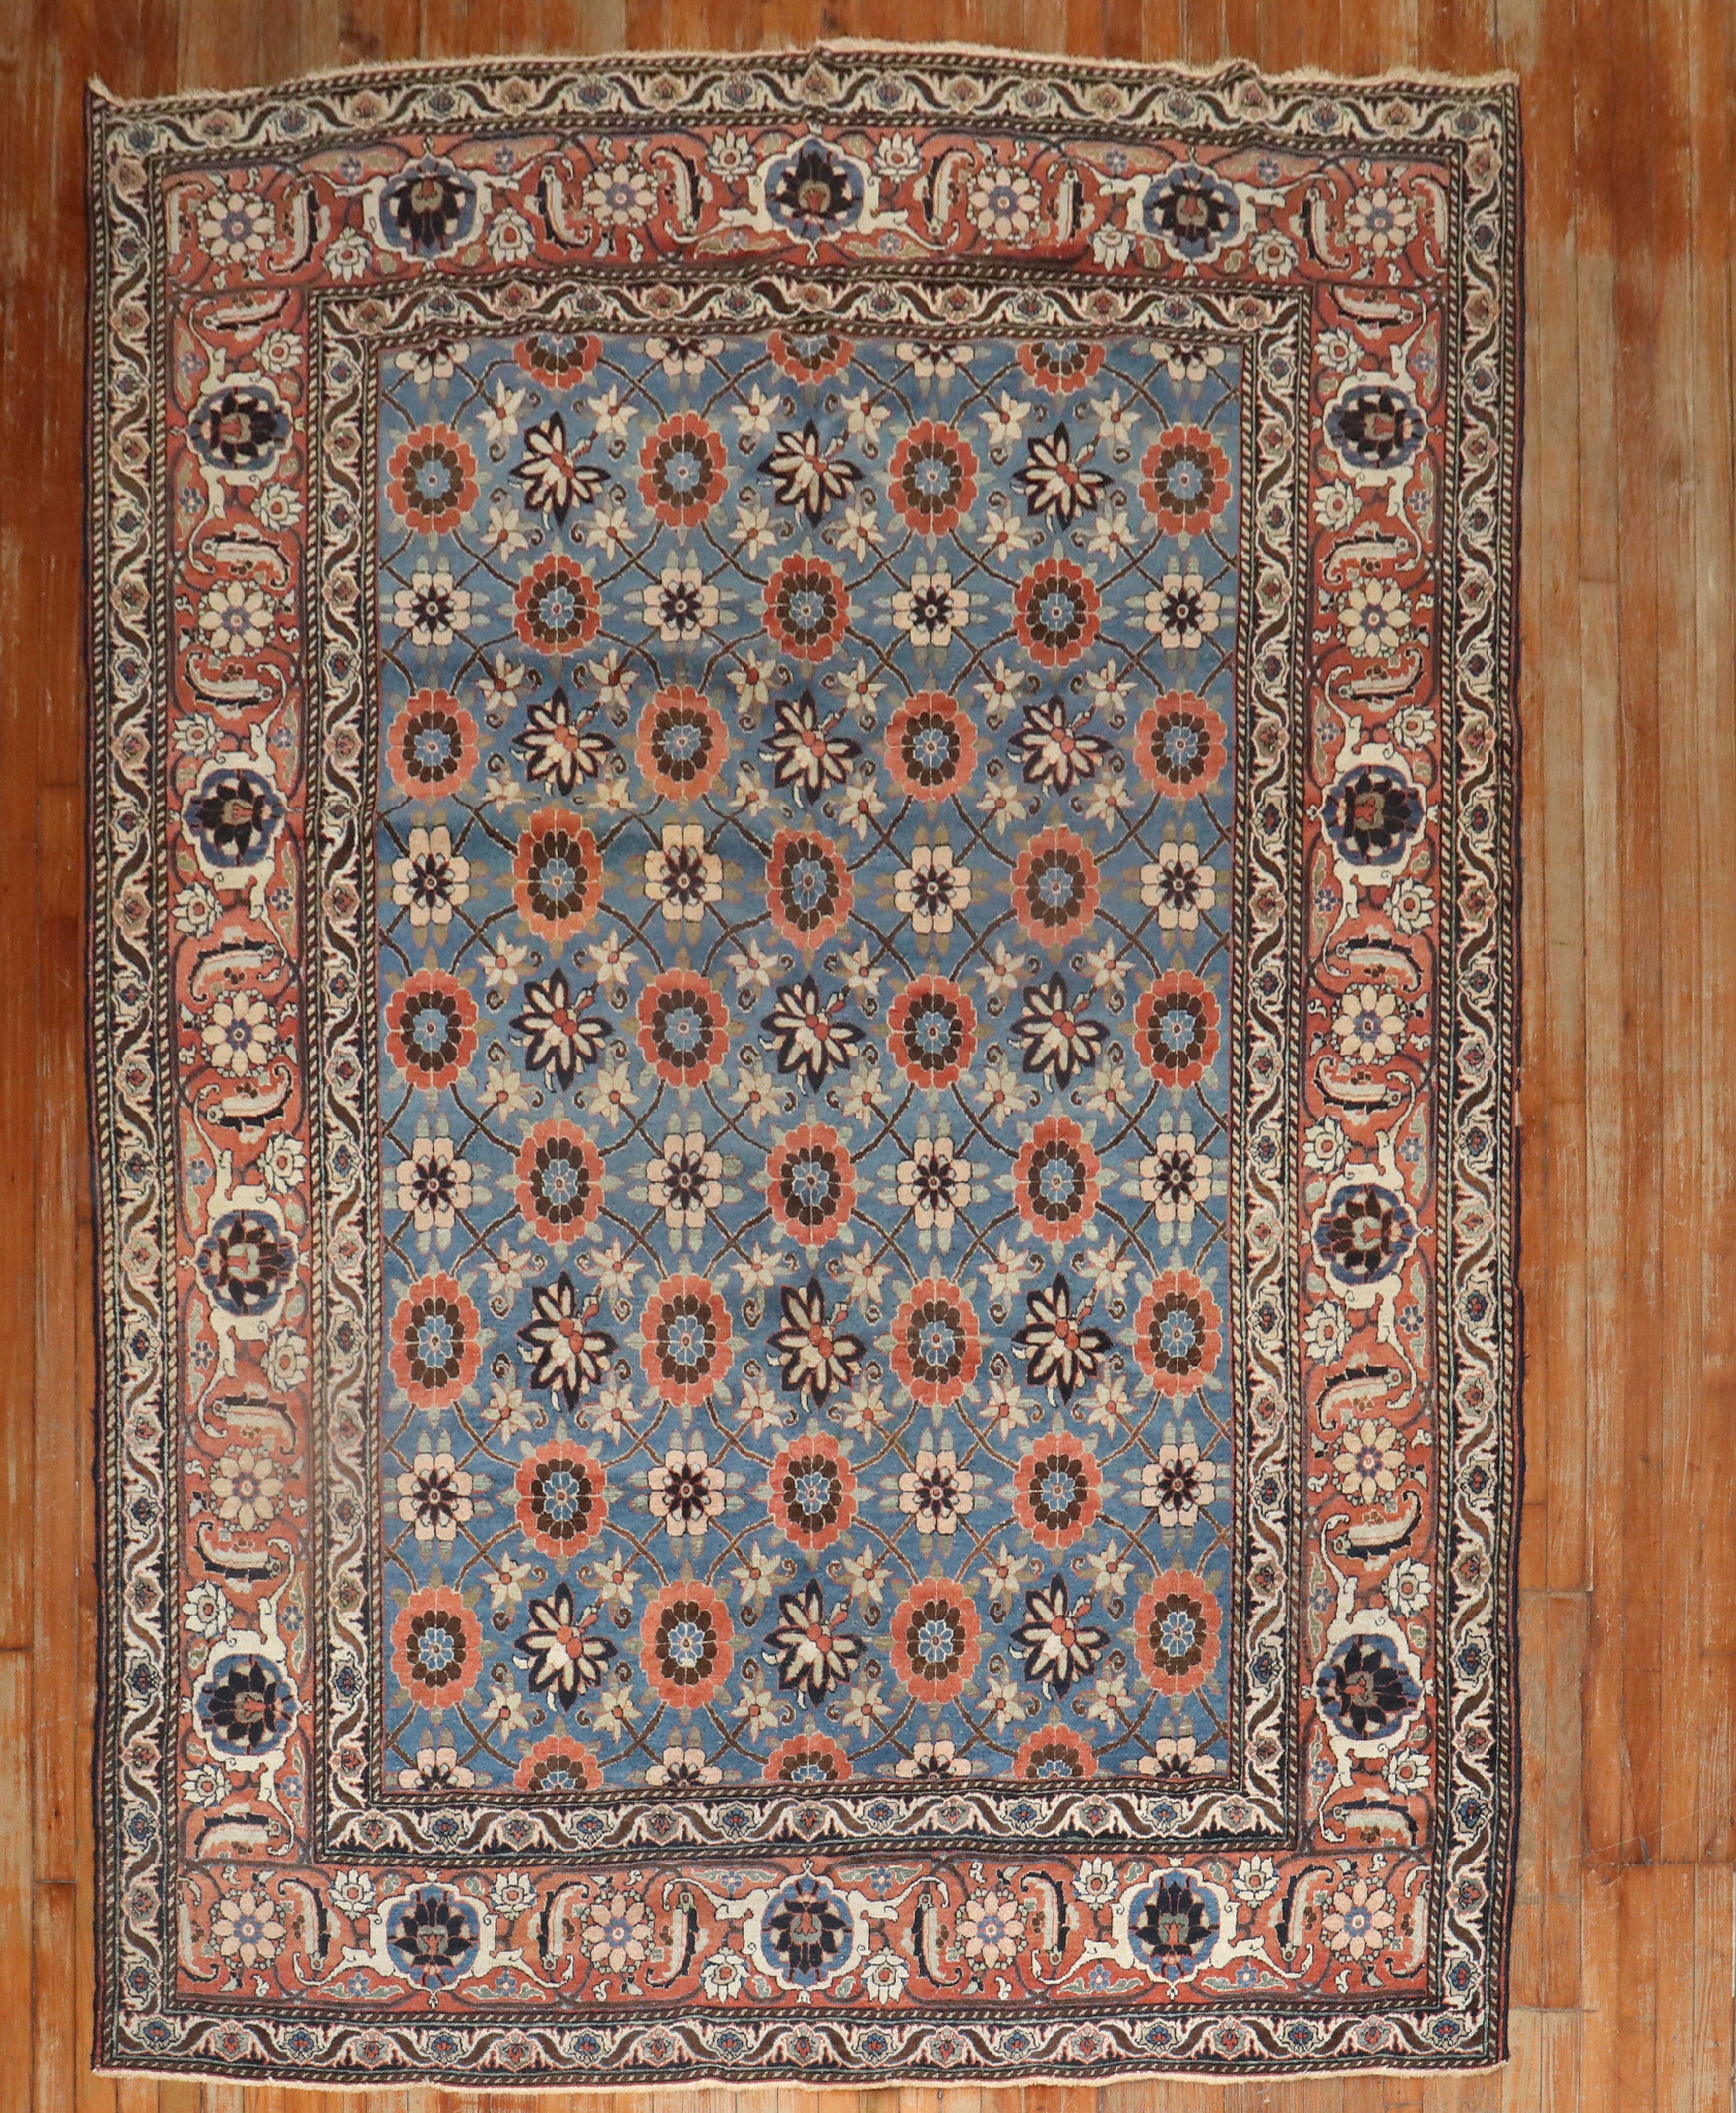 An early 20th century small room size Persian Veramin rug.

Measures: 6'9'' x 10'3''.